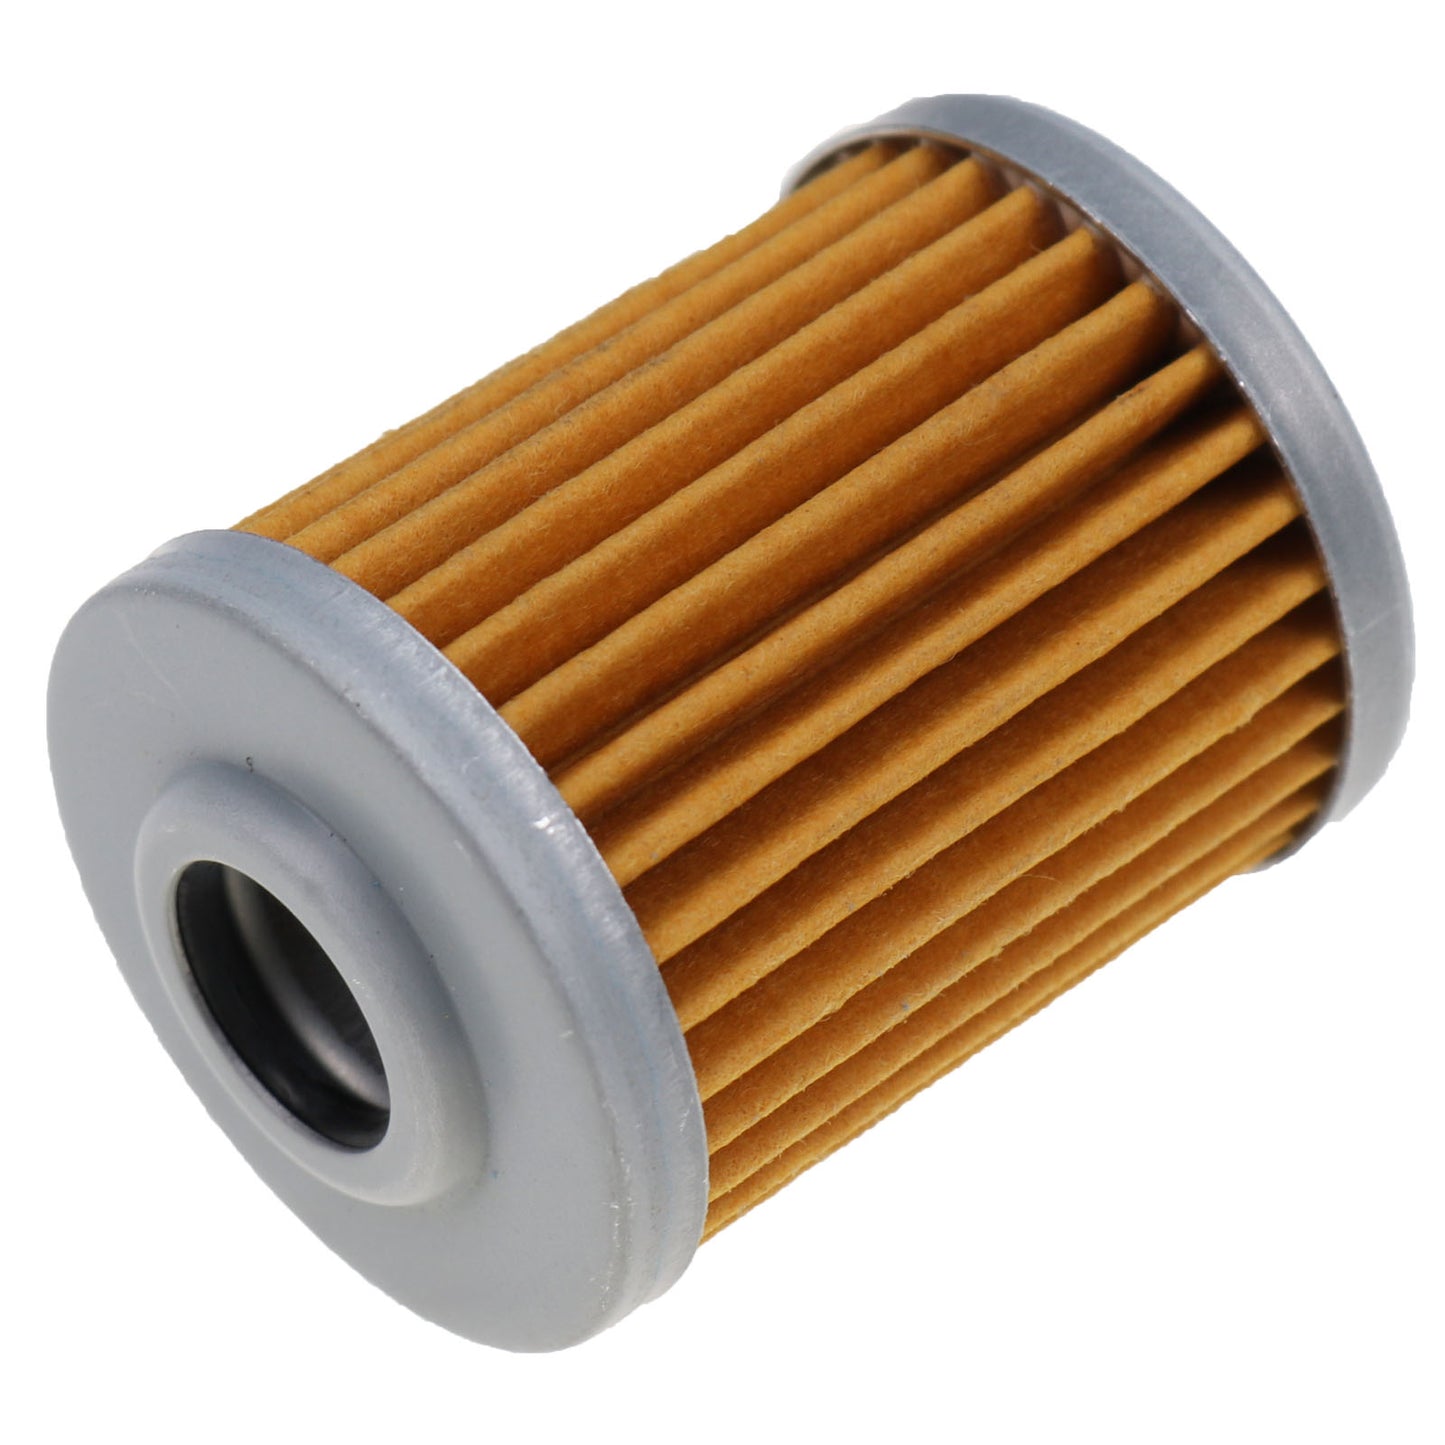 New Fuel Filter 16901-ZY3-003 Compatible with Honda BF 115 130 135 150 175 200 225 Sierra 18-79909